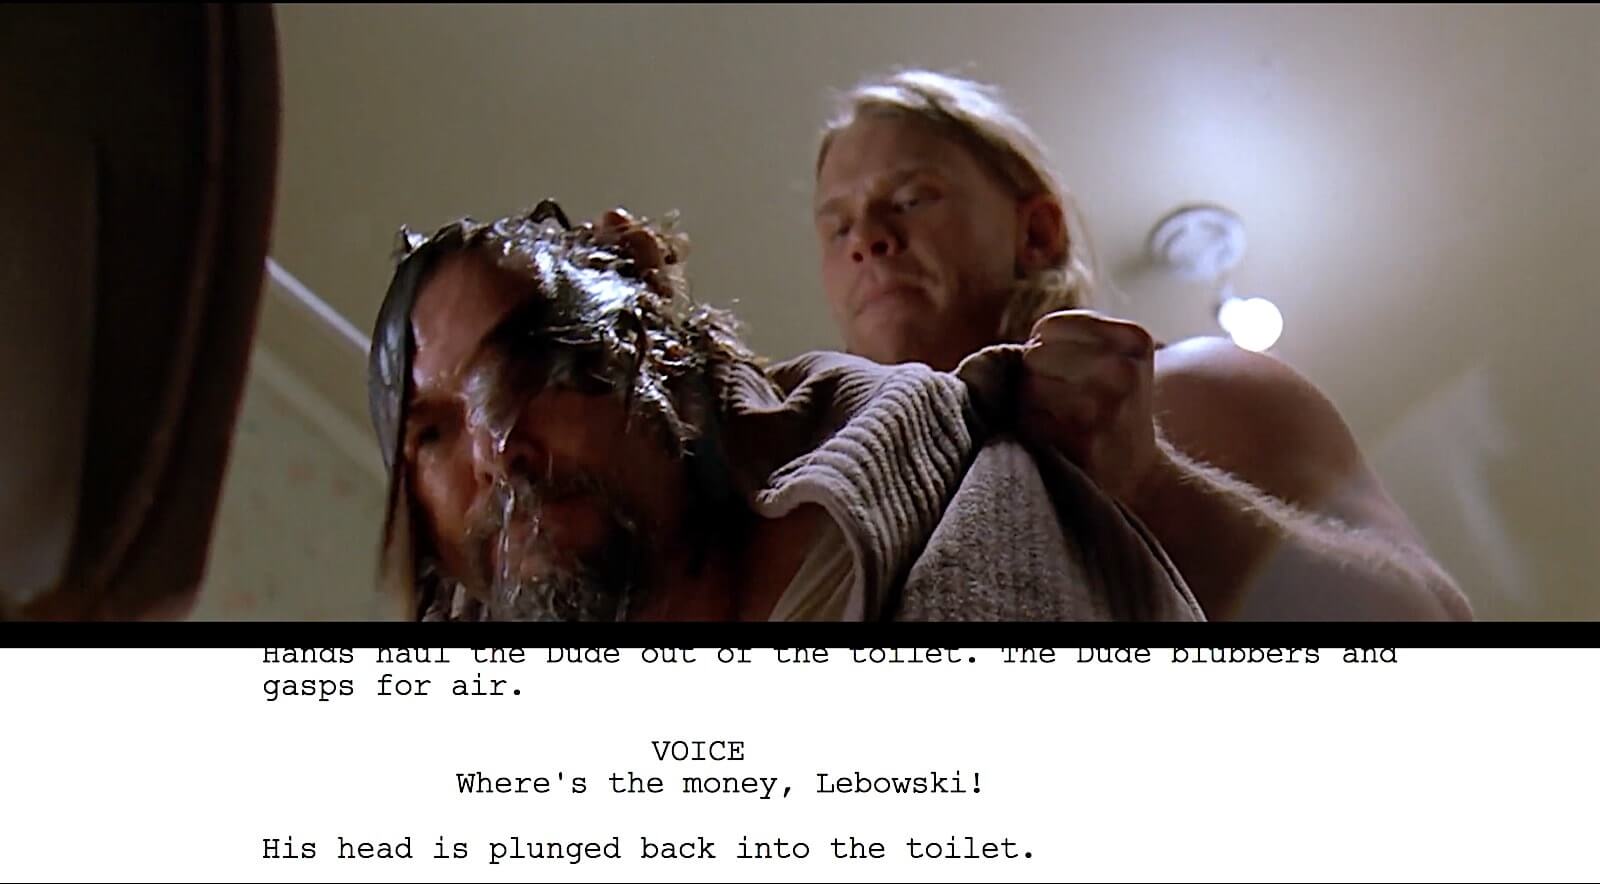 Screenwriting Tips and Strategies from Coen Brothers - The Big Lebowski